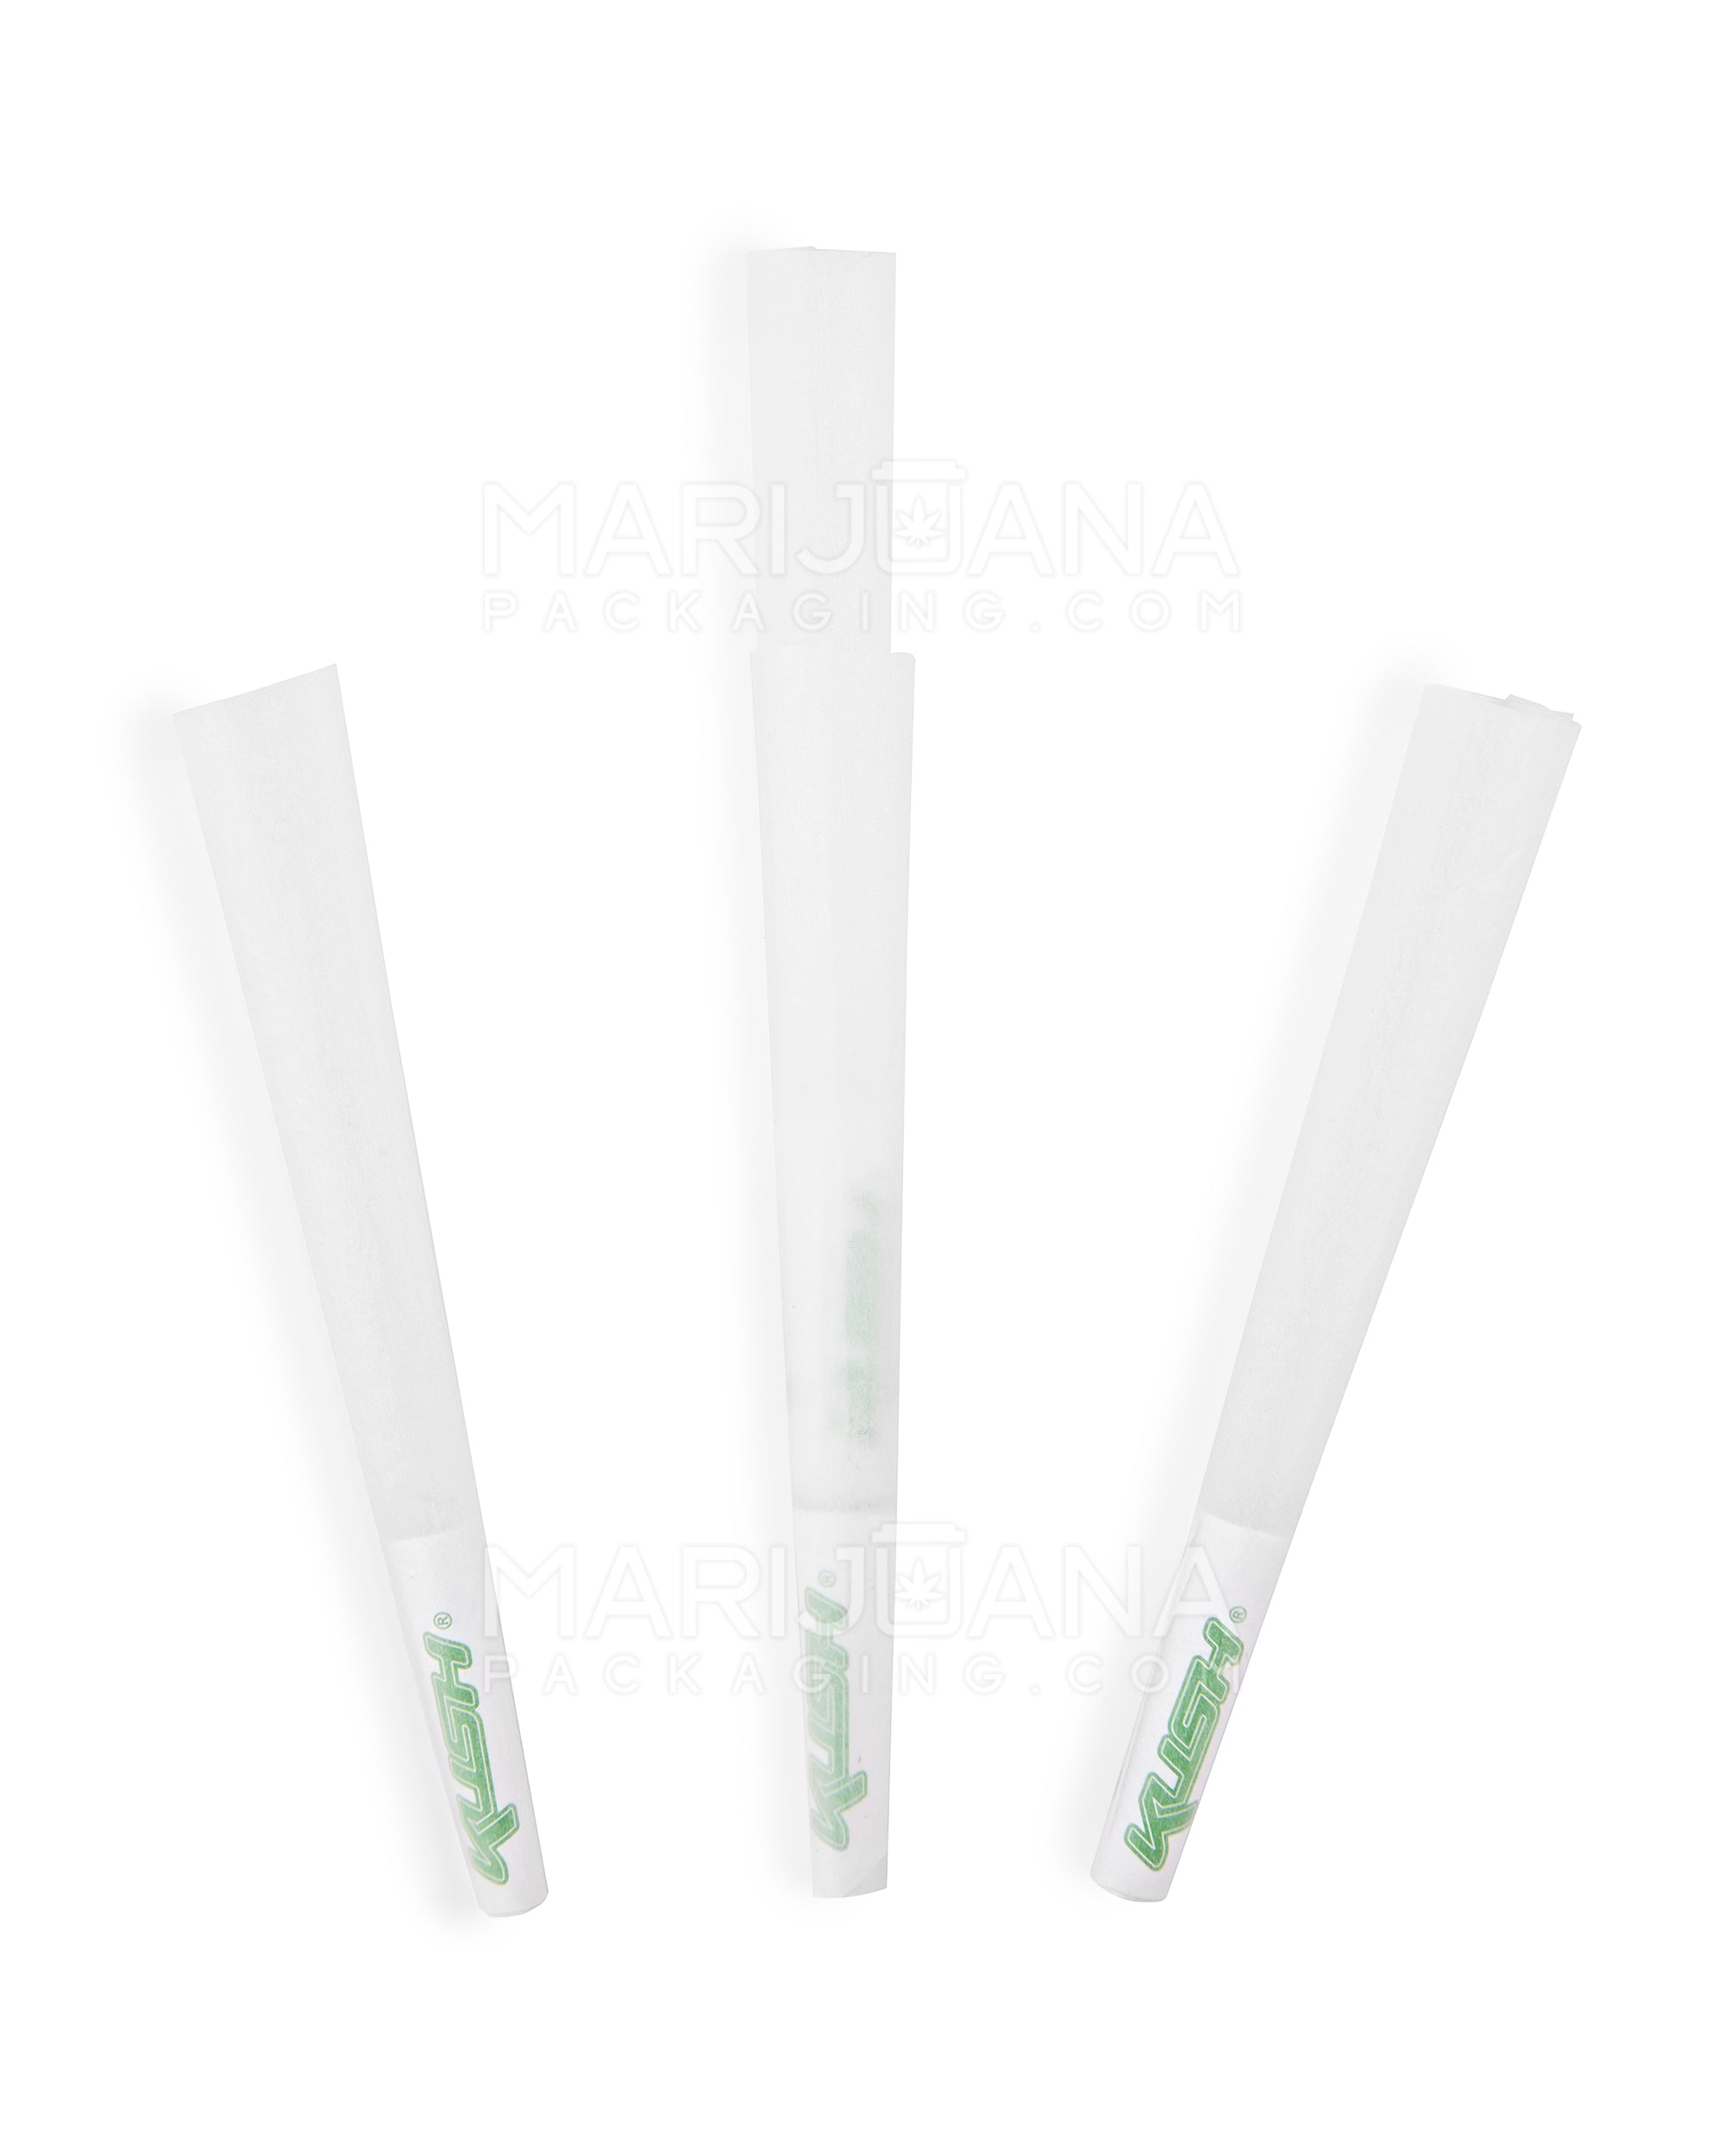 KUSH | Ultra Thin 1 1/4 Pre-Rolled Cones w/ Filter Tip | 84mm - Classic White Paper - 900 Count - 4